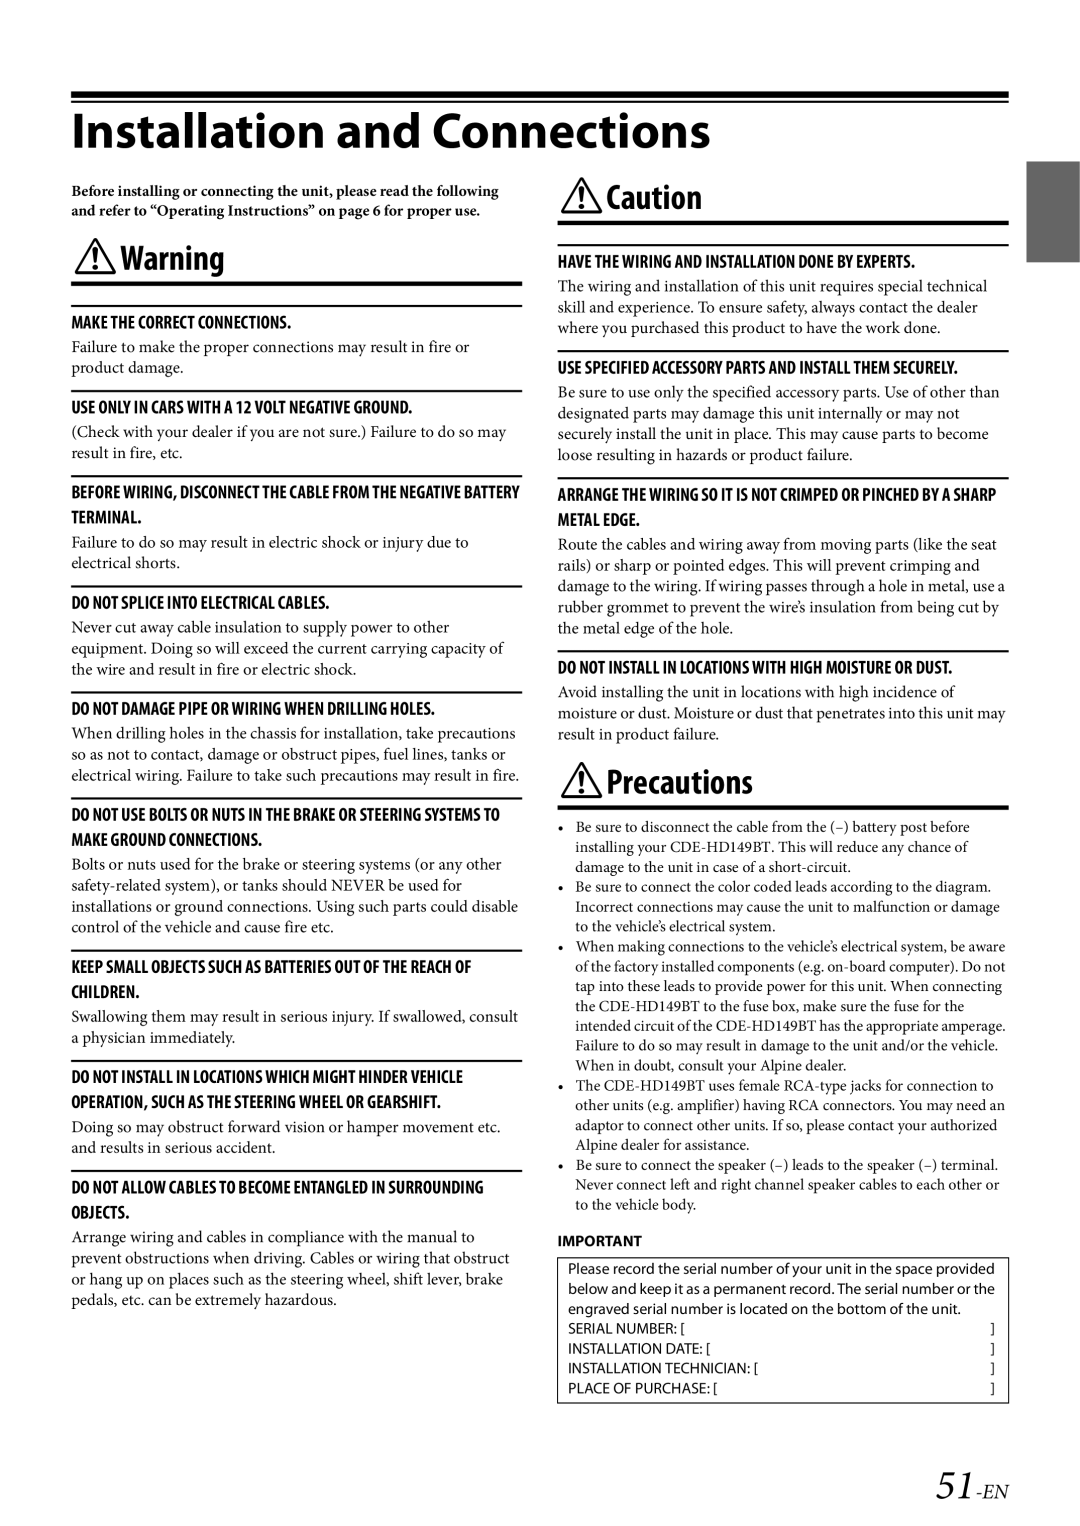 Alpine CDE-HD149BT owner manual Installation and Connections, Warning, Caution, Precautions, 51-EN 